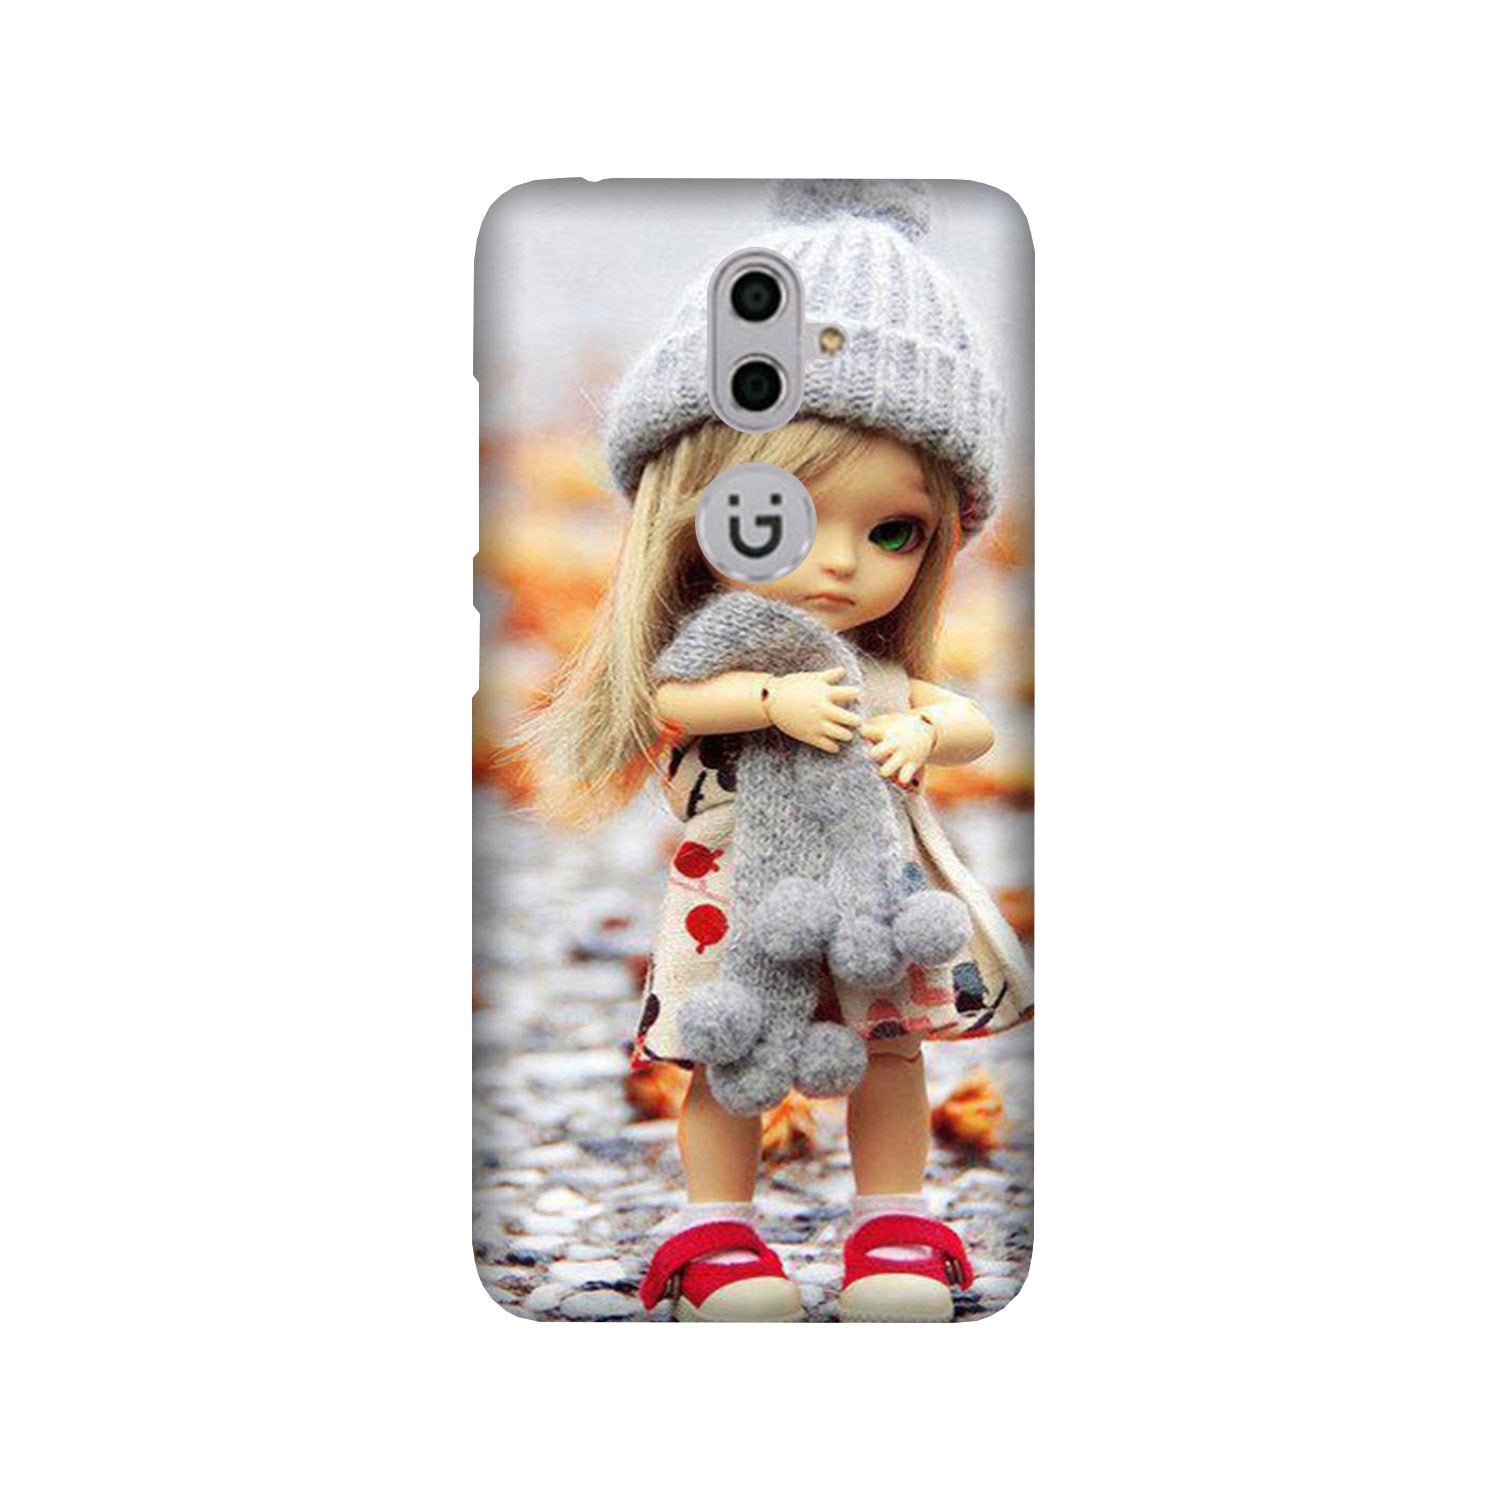 Cute Doll Case for Gionee S9